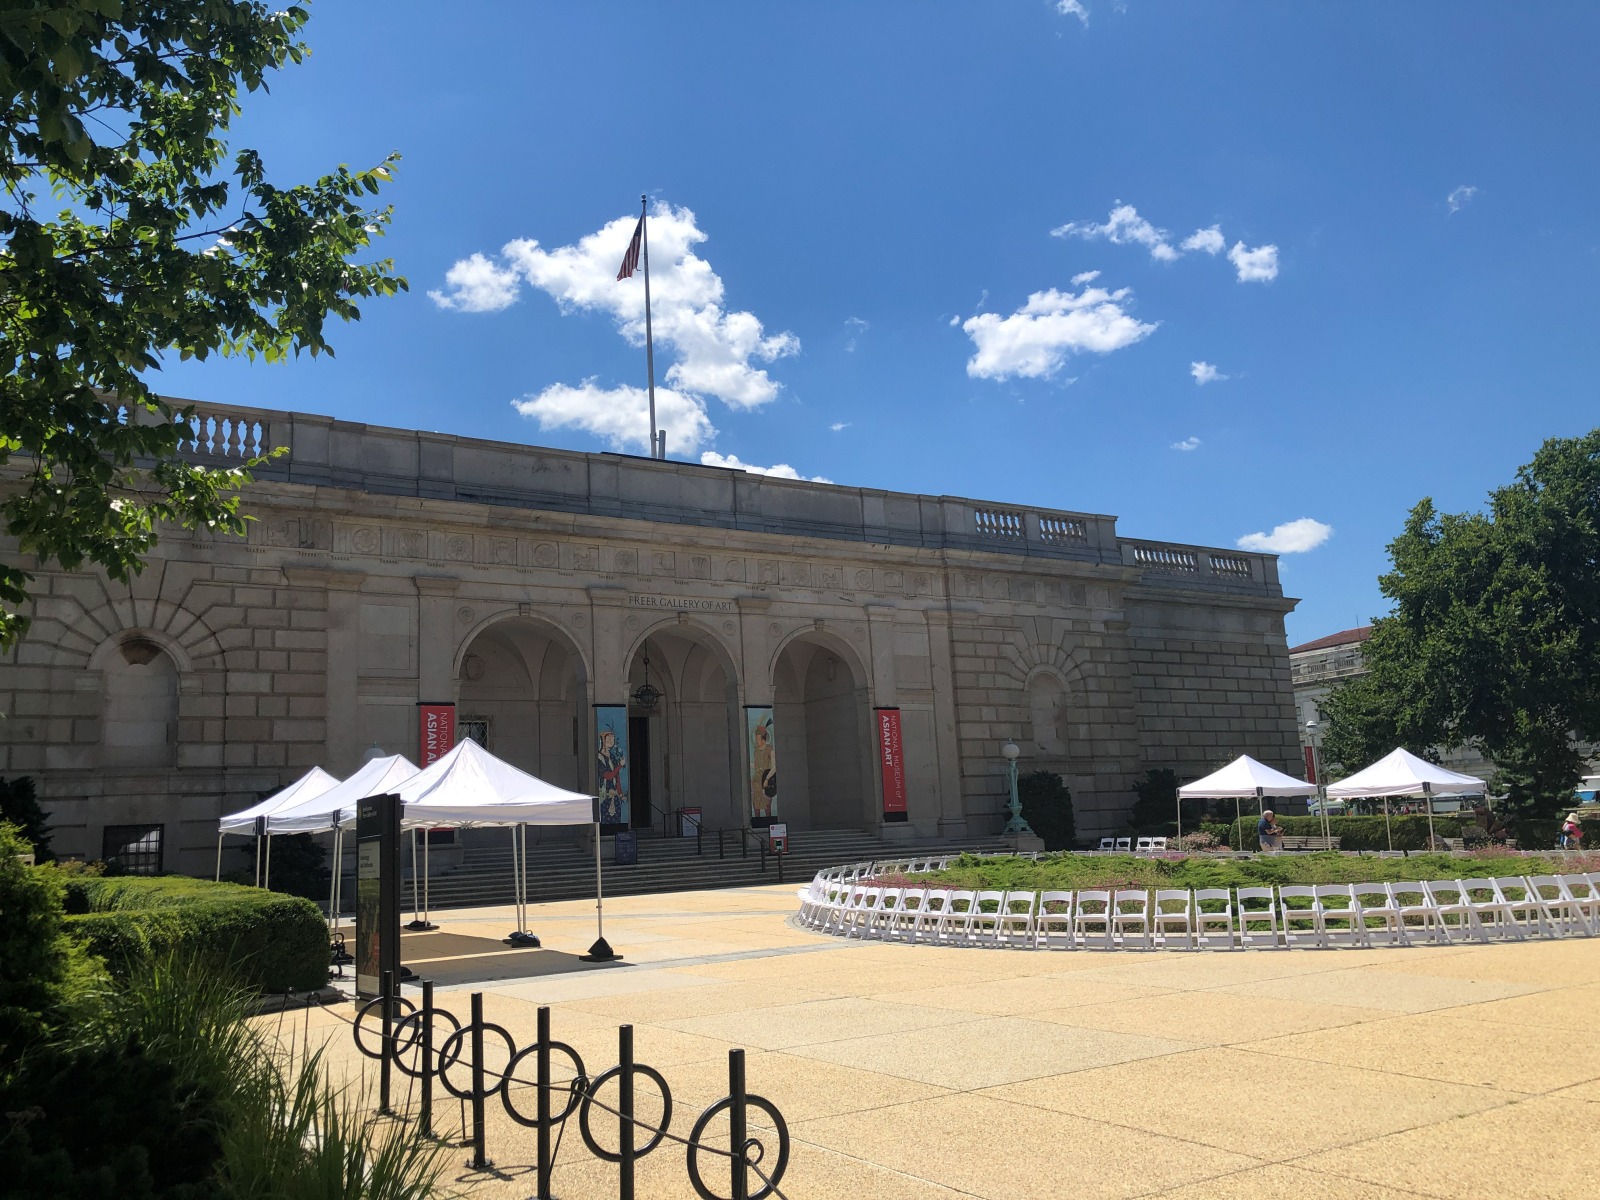 Day 3 – Freer Gallery